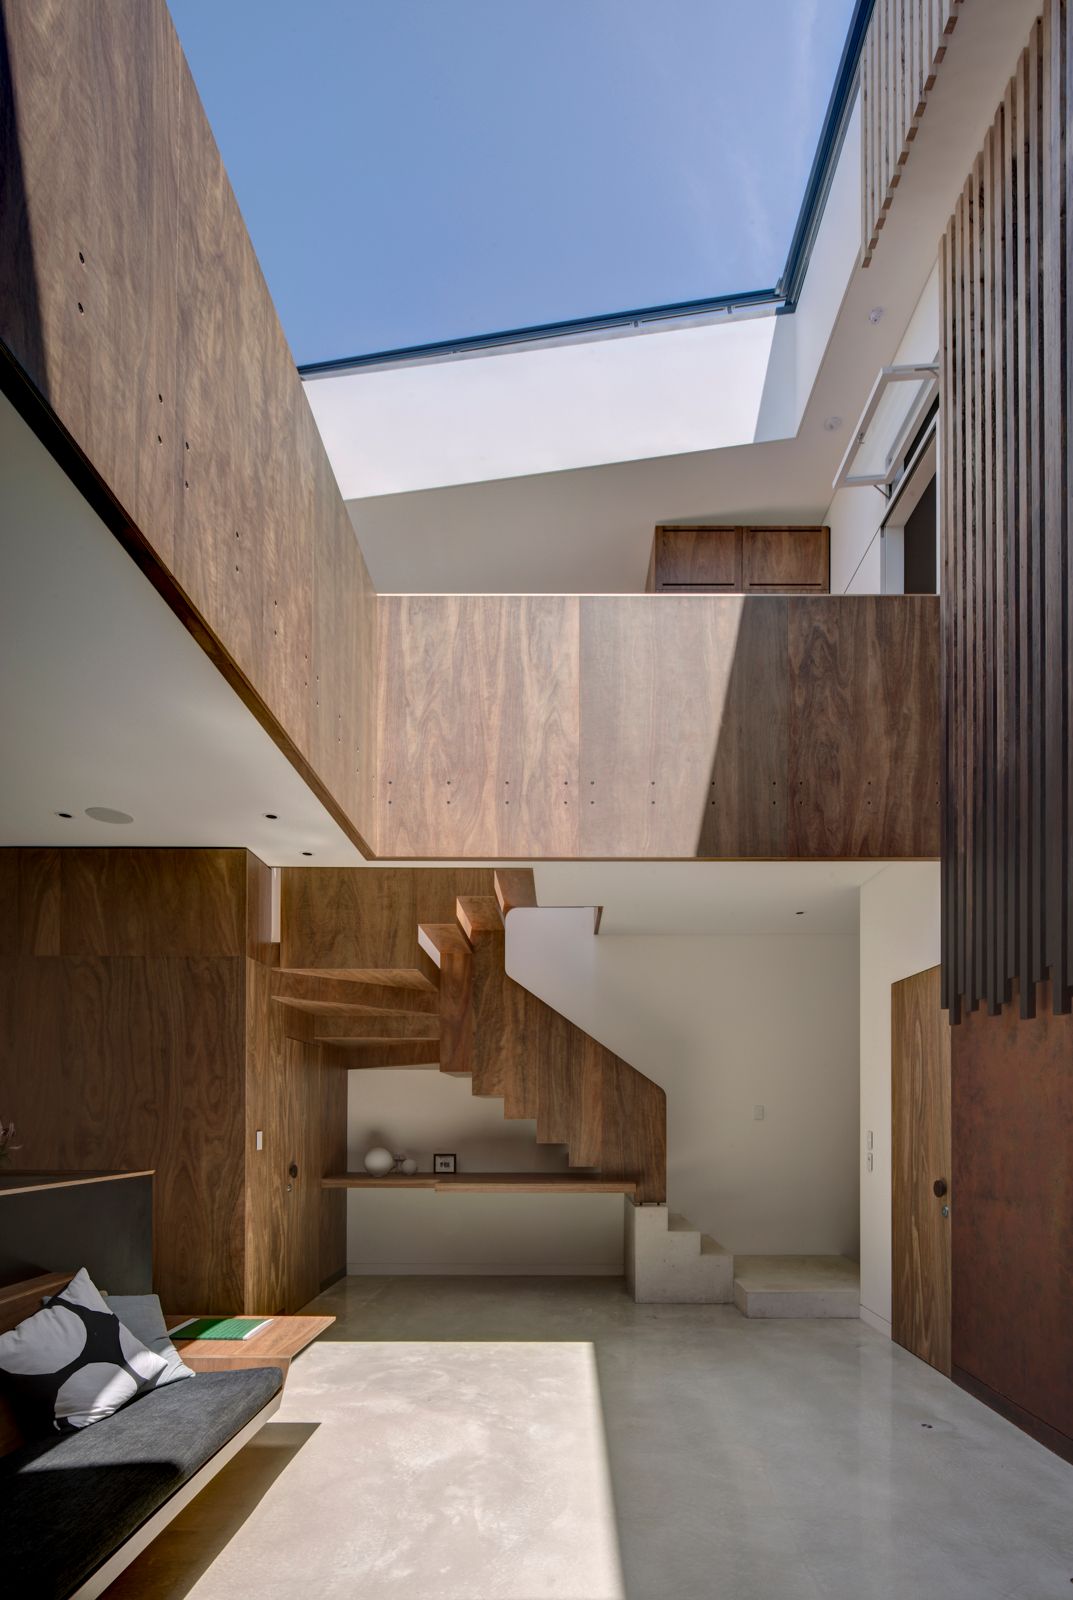 Sky House by Marra+Yeh Architects showing interior view of feature timber and concrete staircase